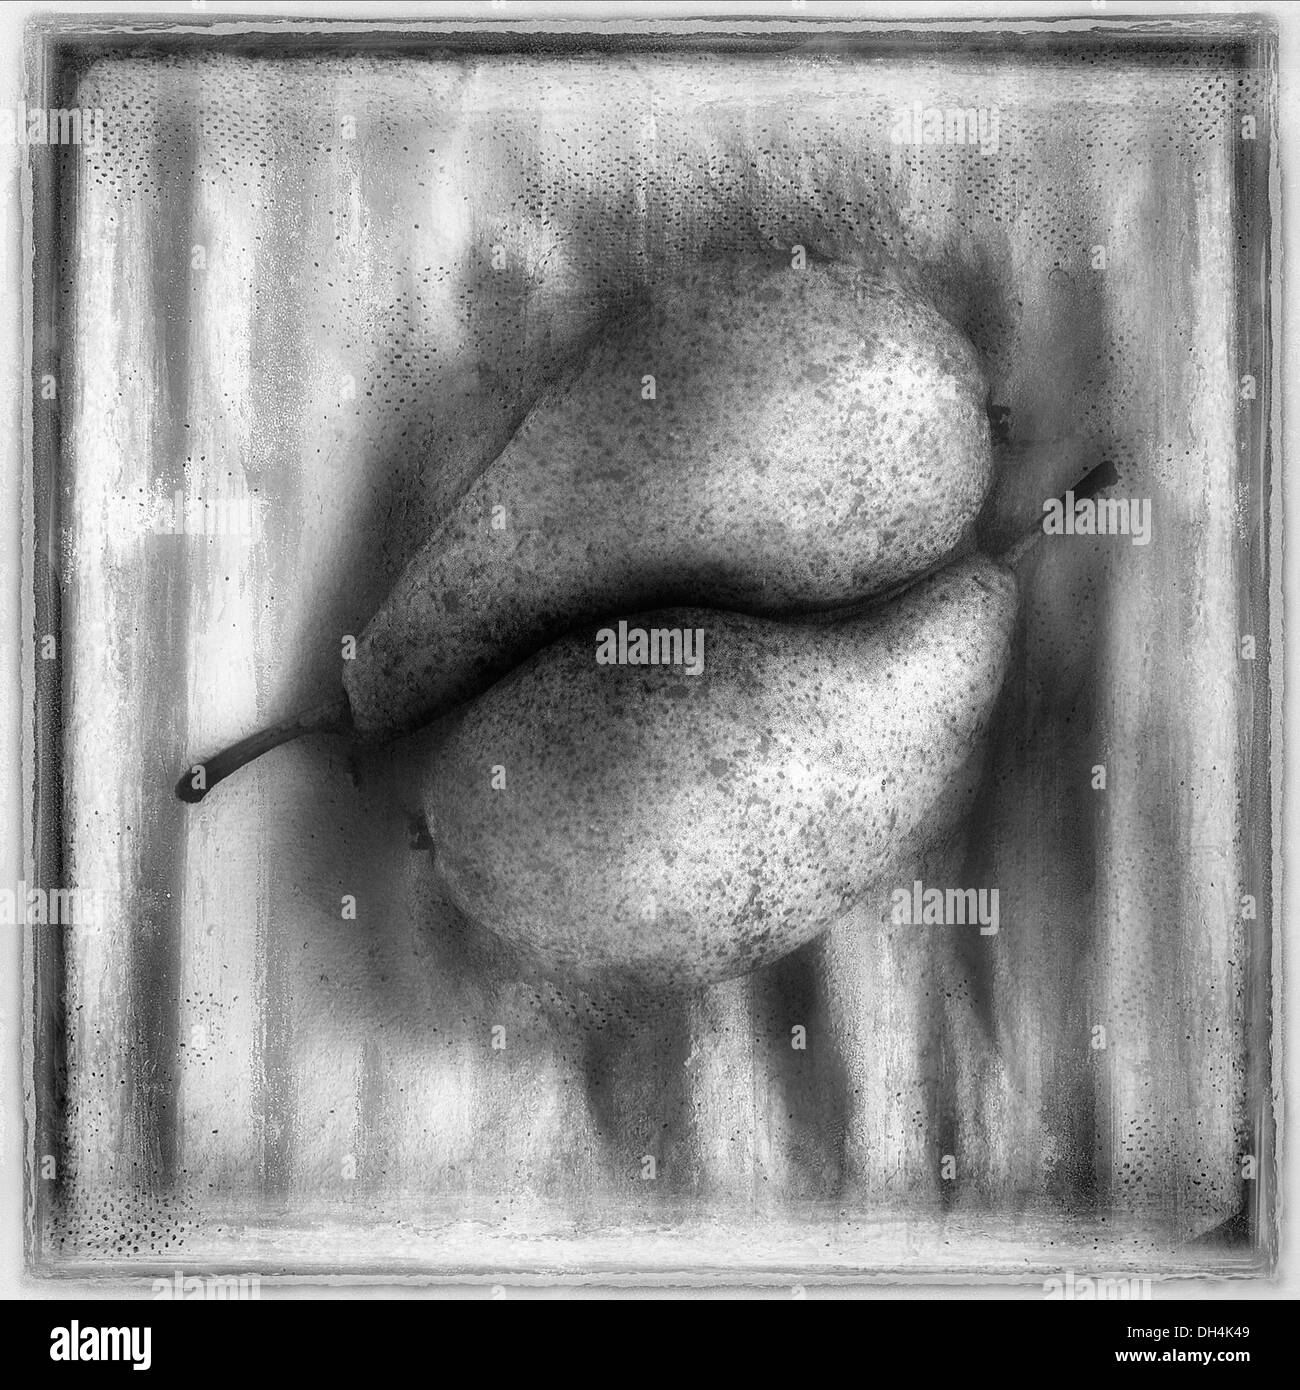 Pear Pyrus communis. Digitally manipulated black and white image of two pears placed together within frame on textured Stock Photo